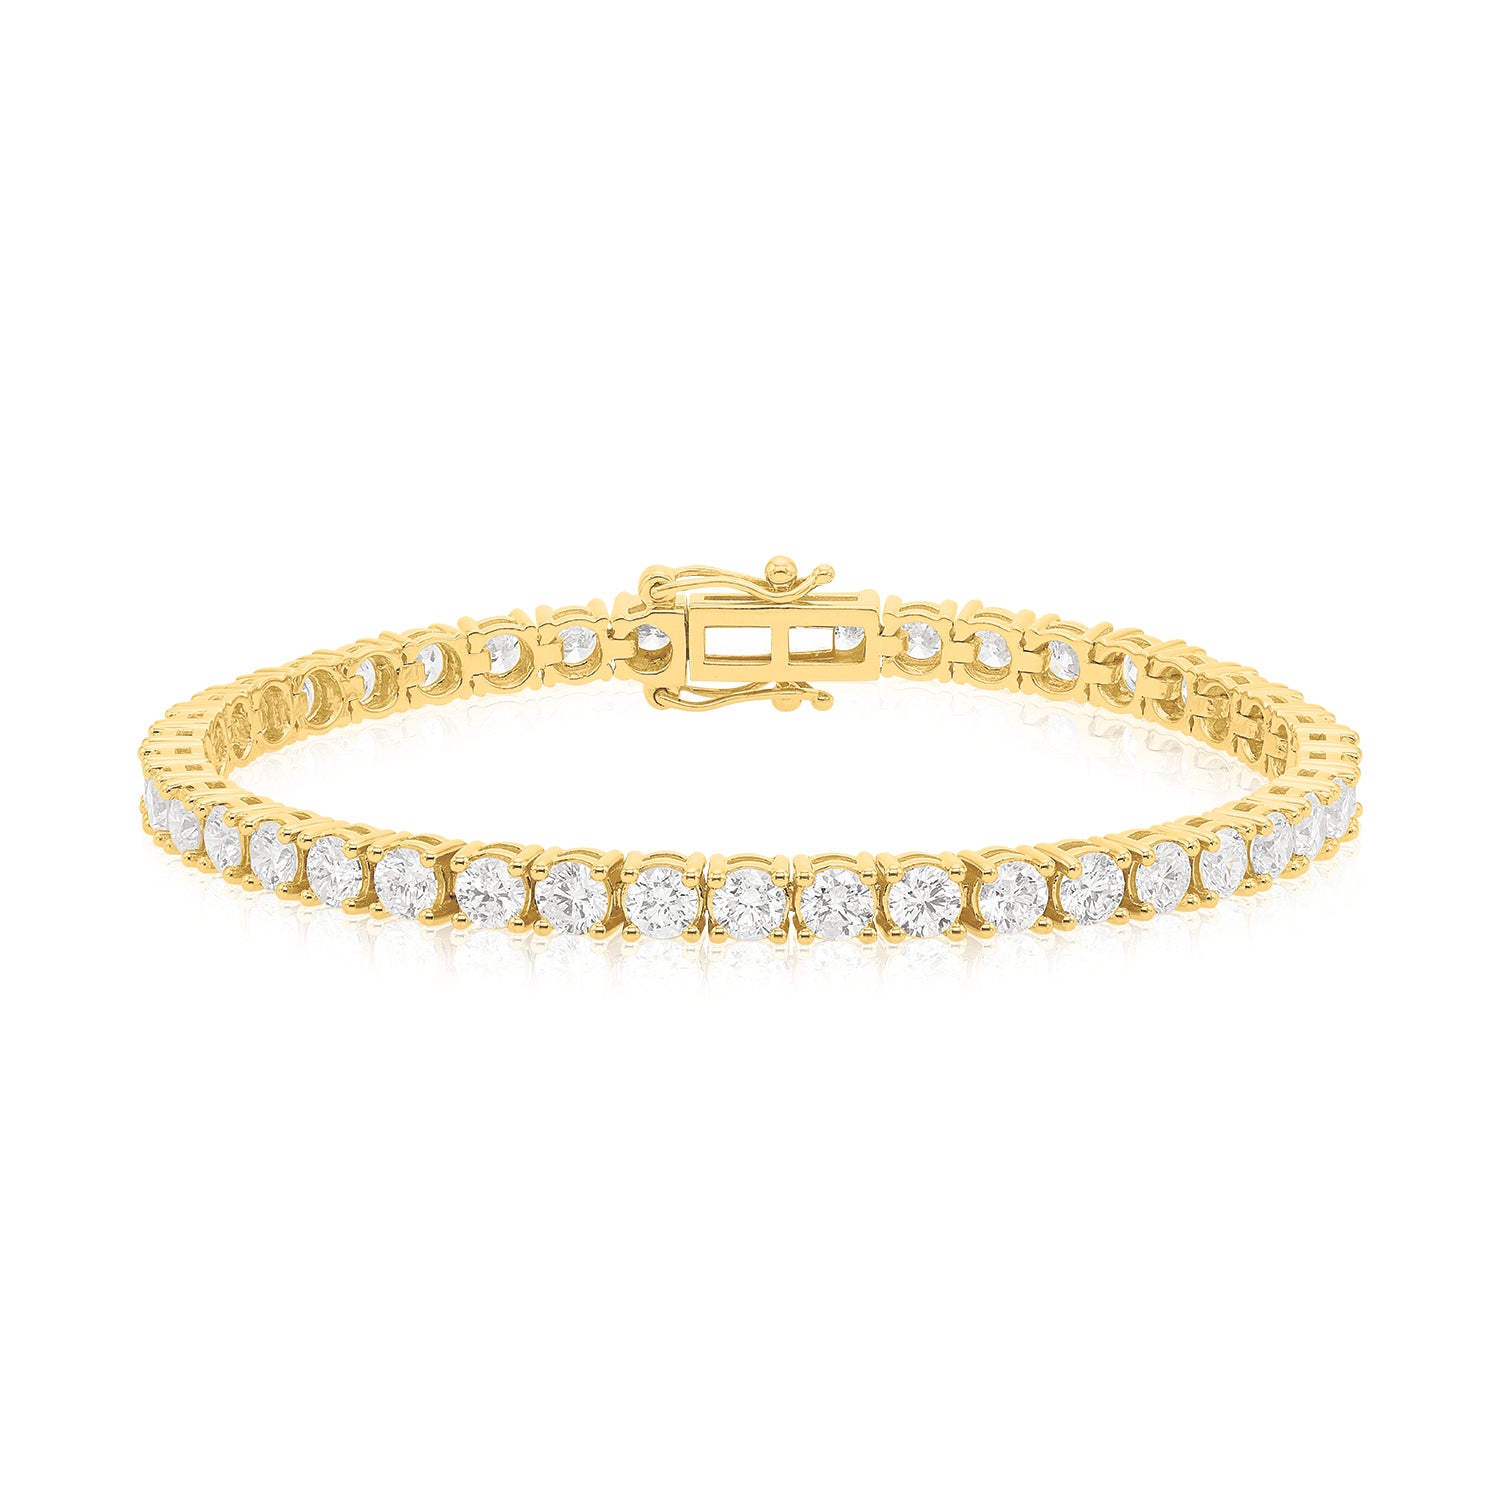 Buy quality 18kt / 750 yellow gold floral diamond bracelet 8brc35 in Pune